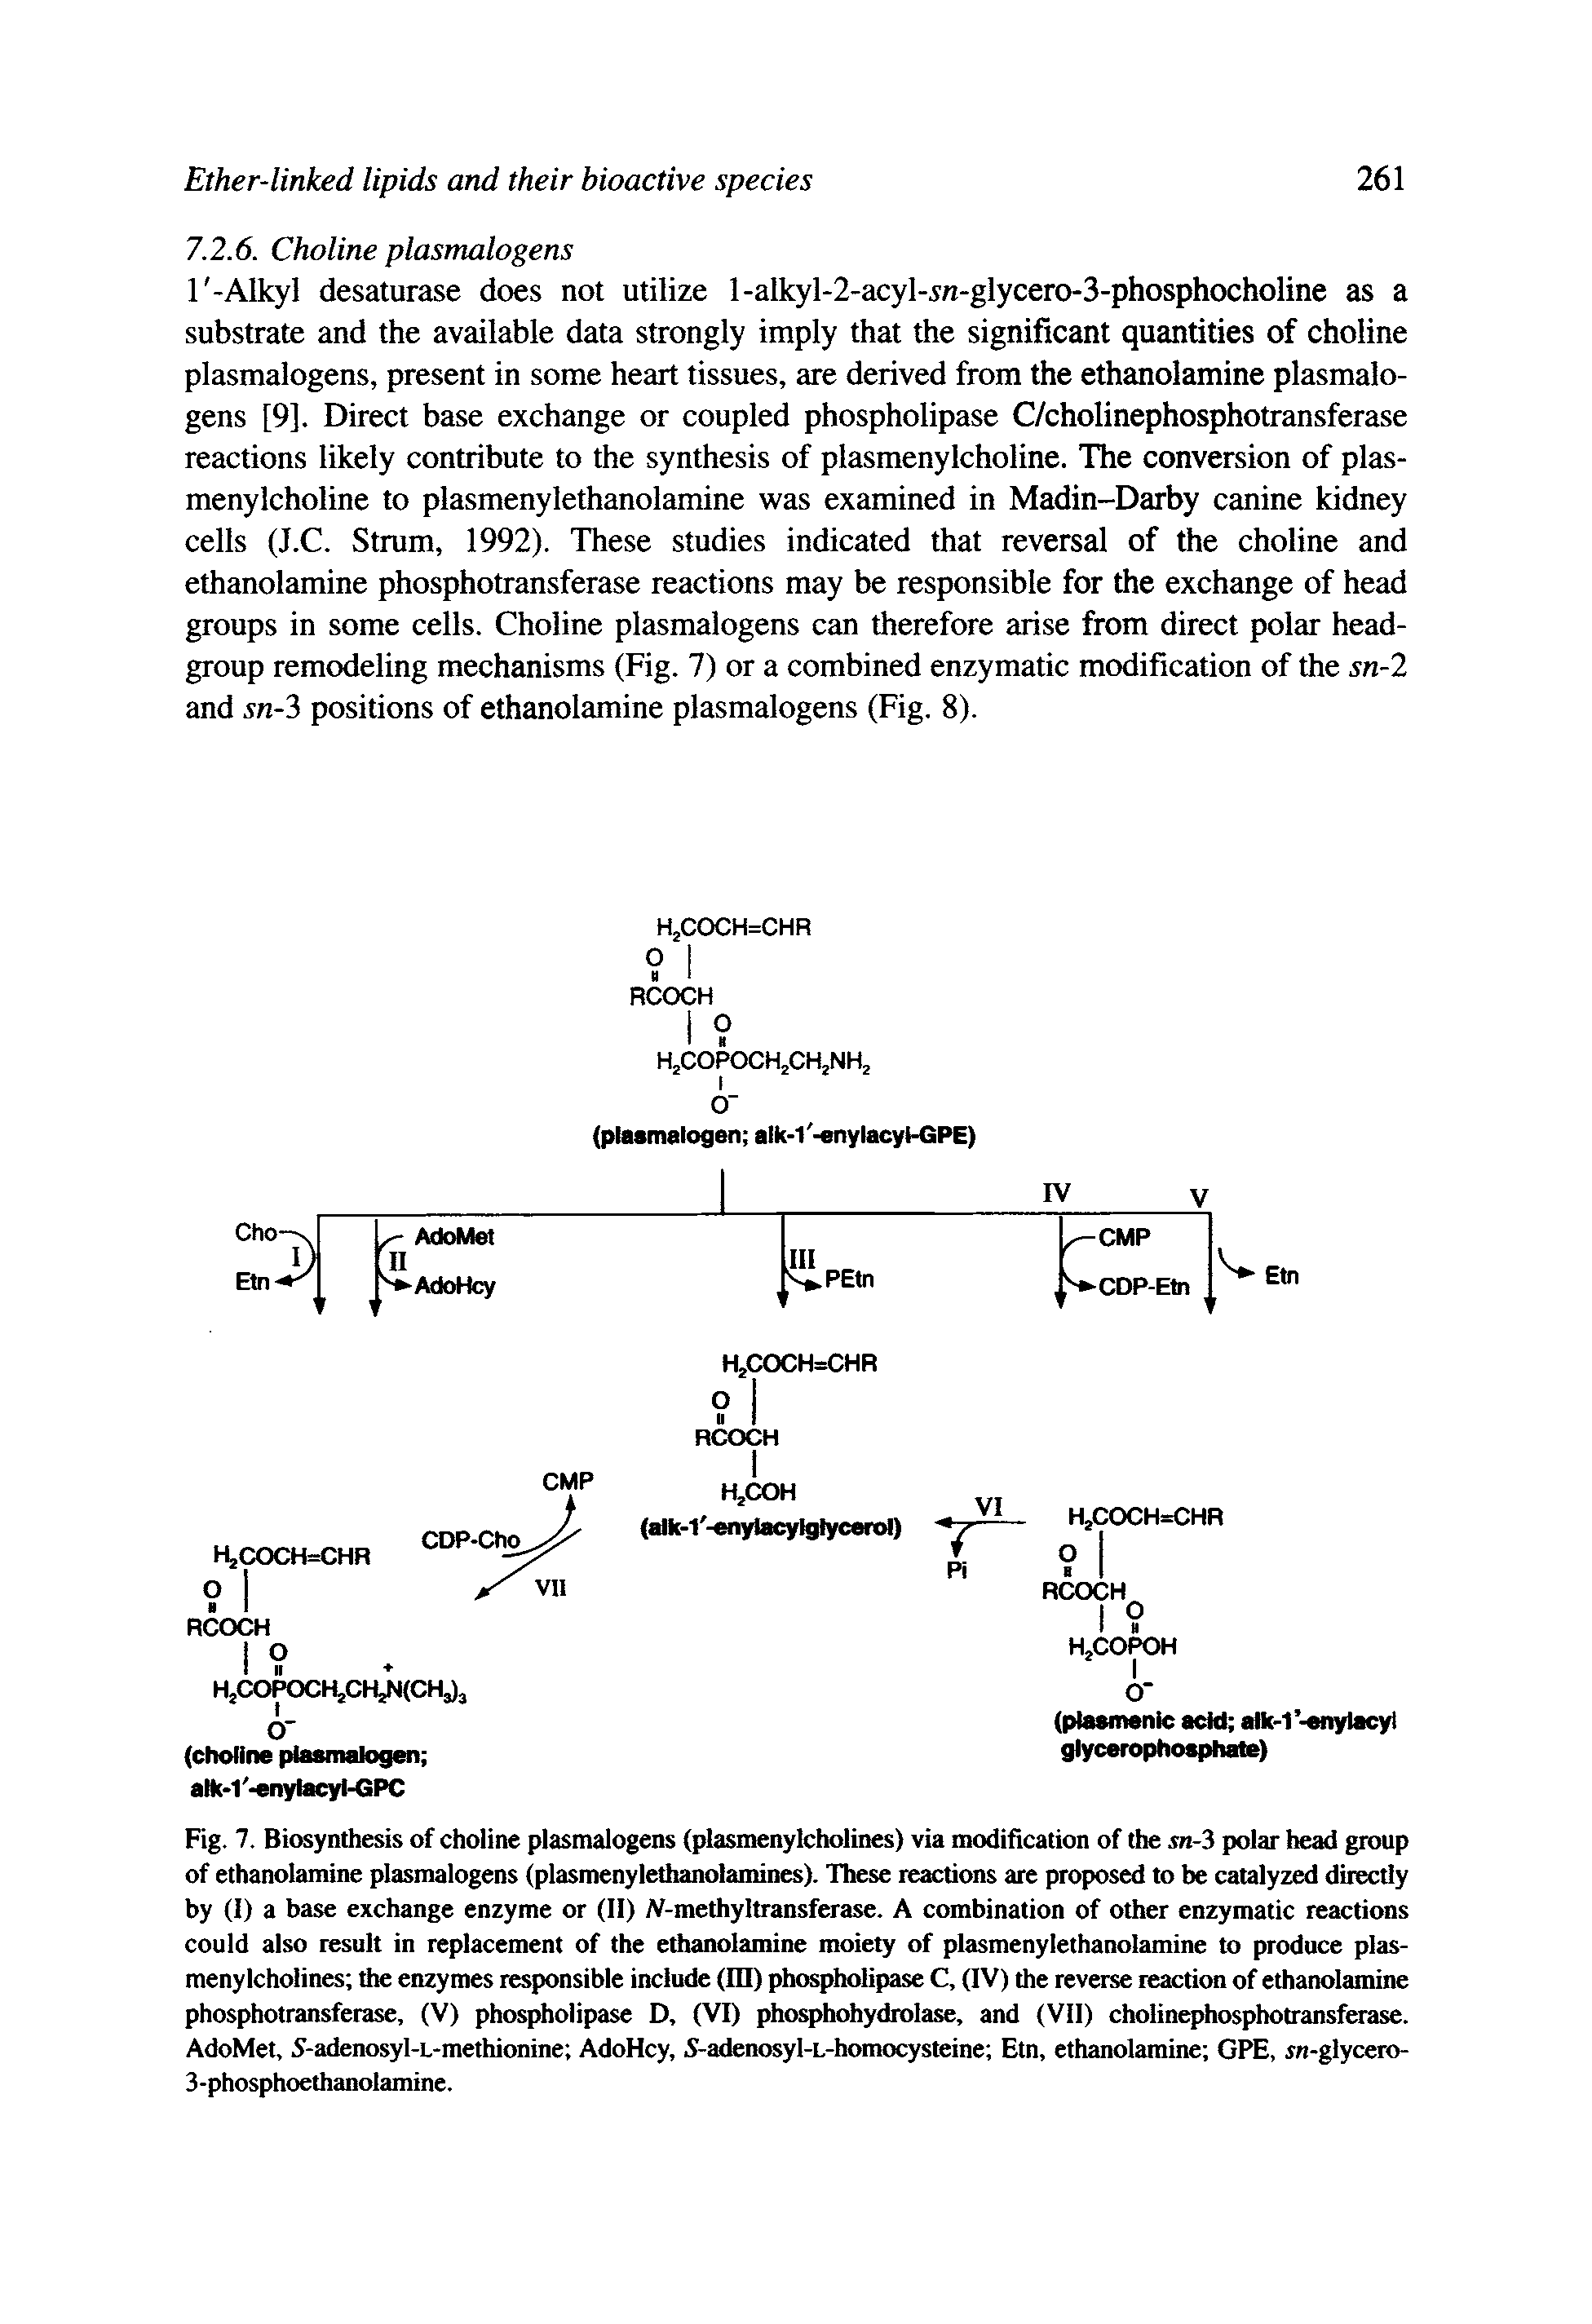 Fig. 7. Biosynthesis of choline plasmalogens (plasmenylcholines) via modification of the sn-3 polar head group of ethanolamine plasmalogens (plasmenylethanolamines). These reactions are proposed to be catalyzed directly by (1) a base exchange enzyme or (II) At-methyltransferase. A combination of other enzymatic reactions could also result in replacement of the ethanolamine moiety of plasmenylethanolamine to produce plasmenylcholines the enzymes responsible include (IB) phospholipase C, (IV) the reverse reaction of ethanolamine phosphotransferase, (V) phospholipase D, (VI) phosphohydtolase, and (VII) cholinephosphotransferase. AdoMet, 5-adenosyl-L-methionine AdoHcy, 5-adenosyl-L-homocysteine Etn, ethanolamine GPE, sn-glycero-...